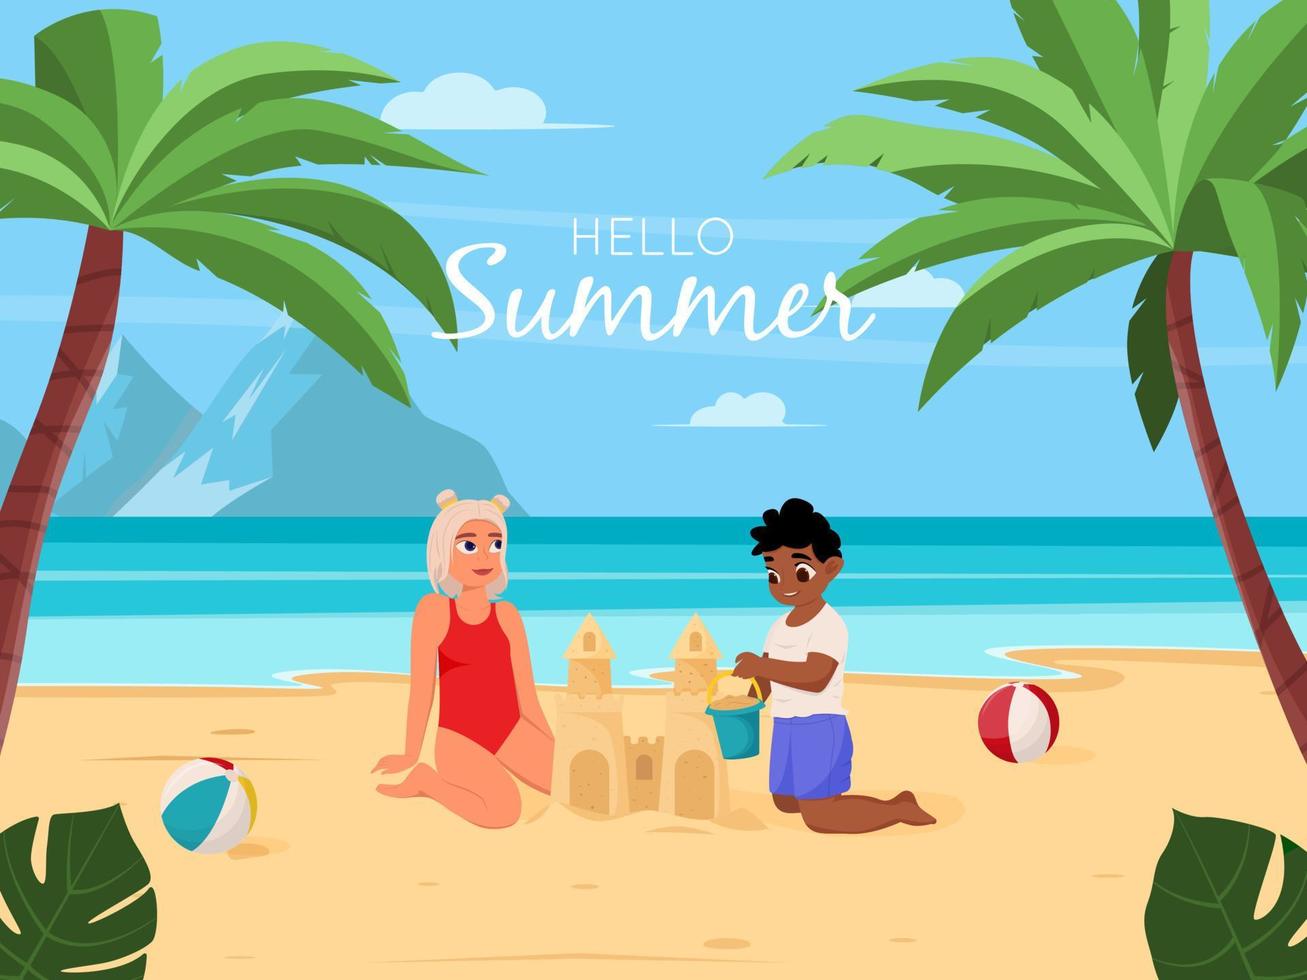 Summer vacation concept background. Beautiful summer beach landscape with sea, palm trees, sand castle. Children are building a sand castle. Flat vector illustration for poster, banner, flyer.